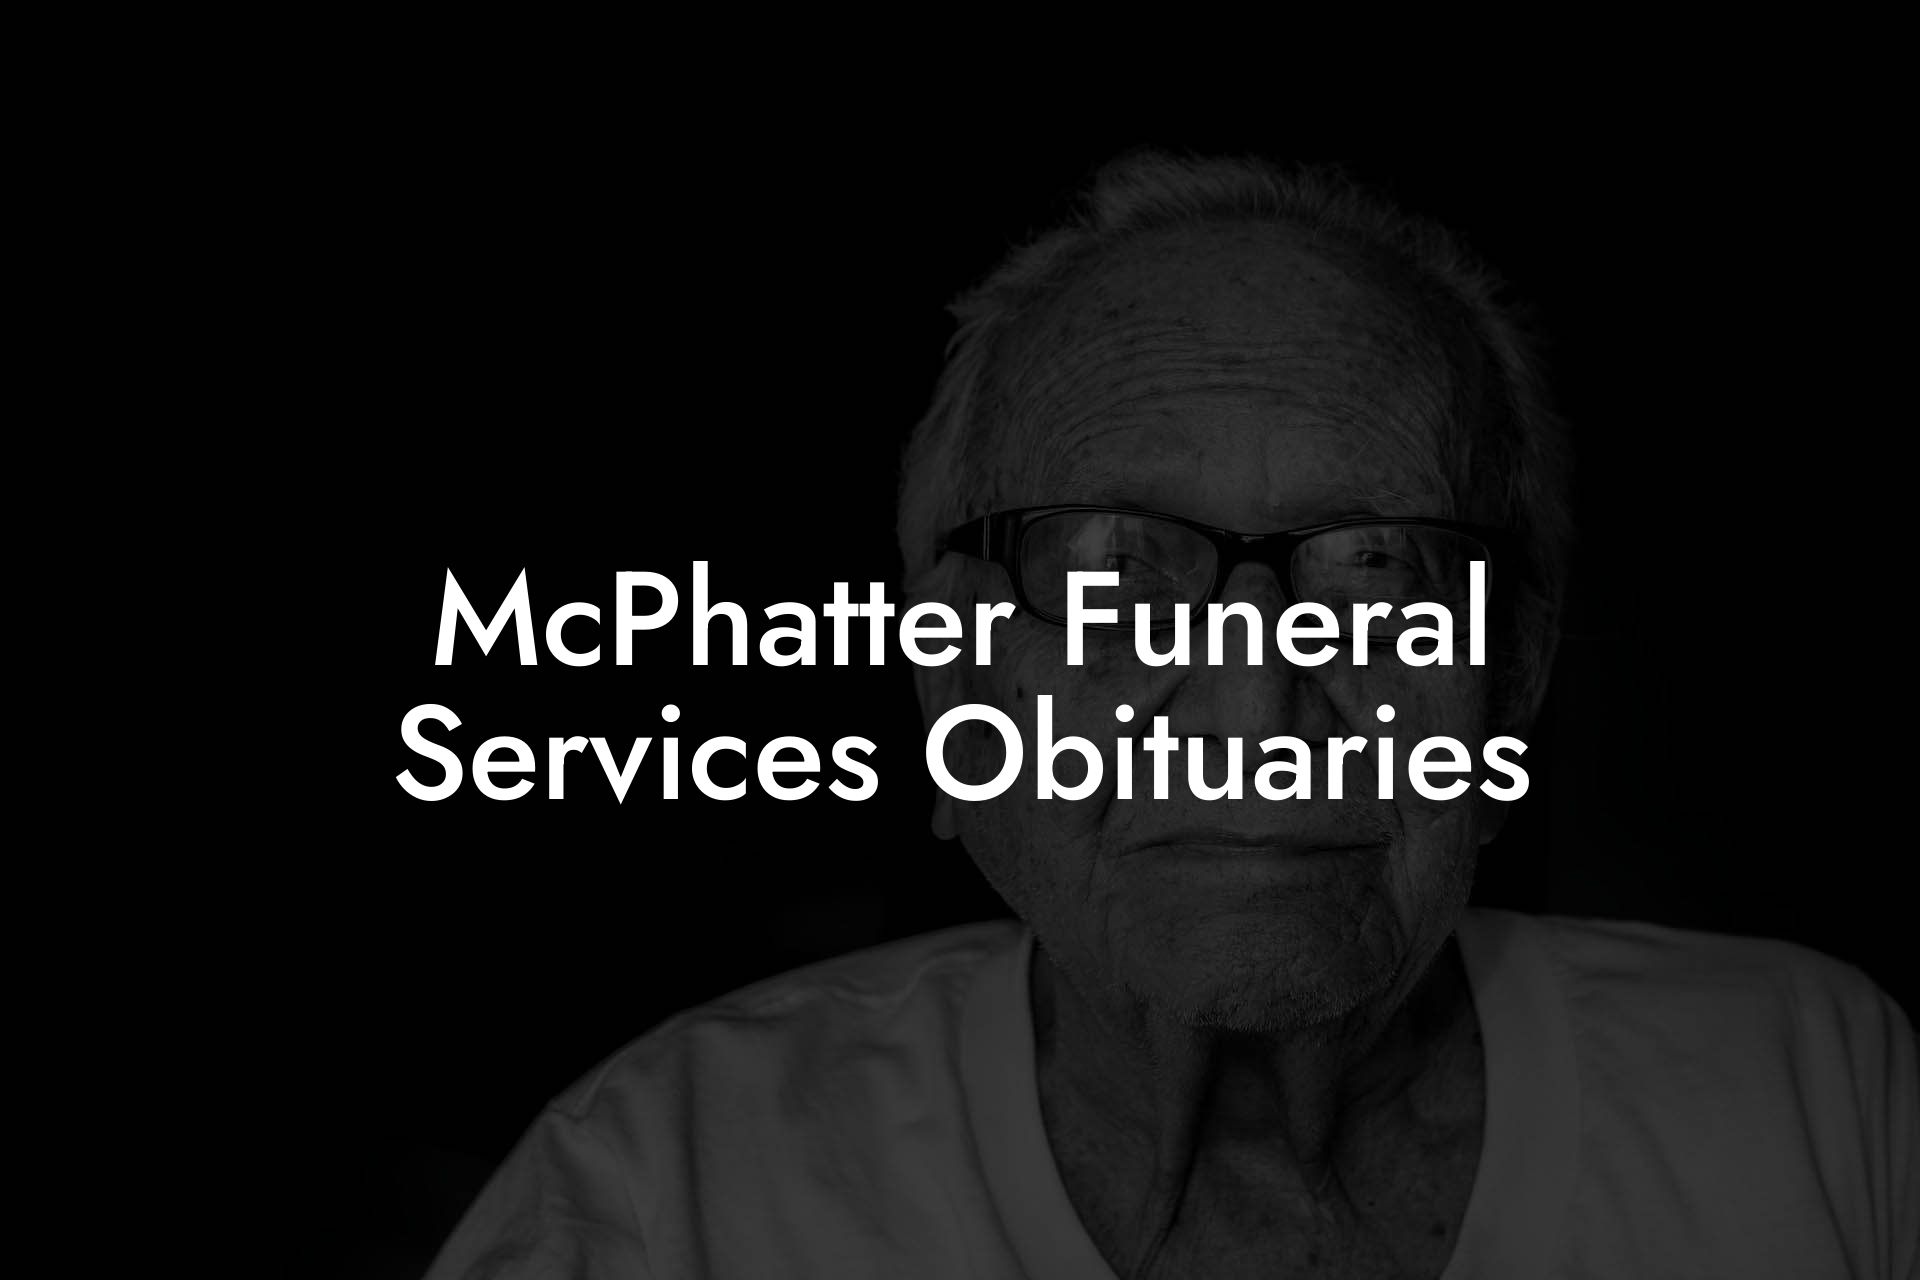 McPhatter Funeral Services Obituaries